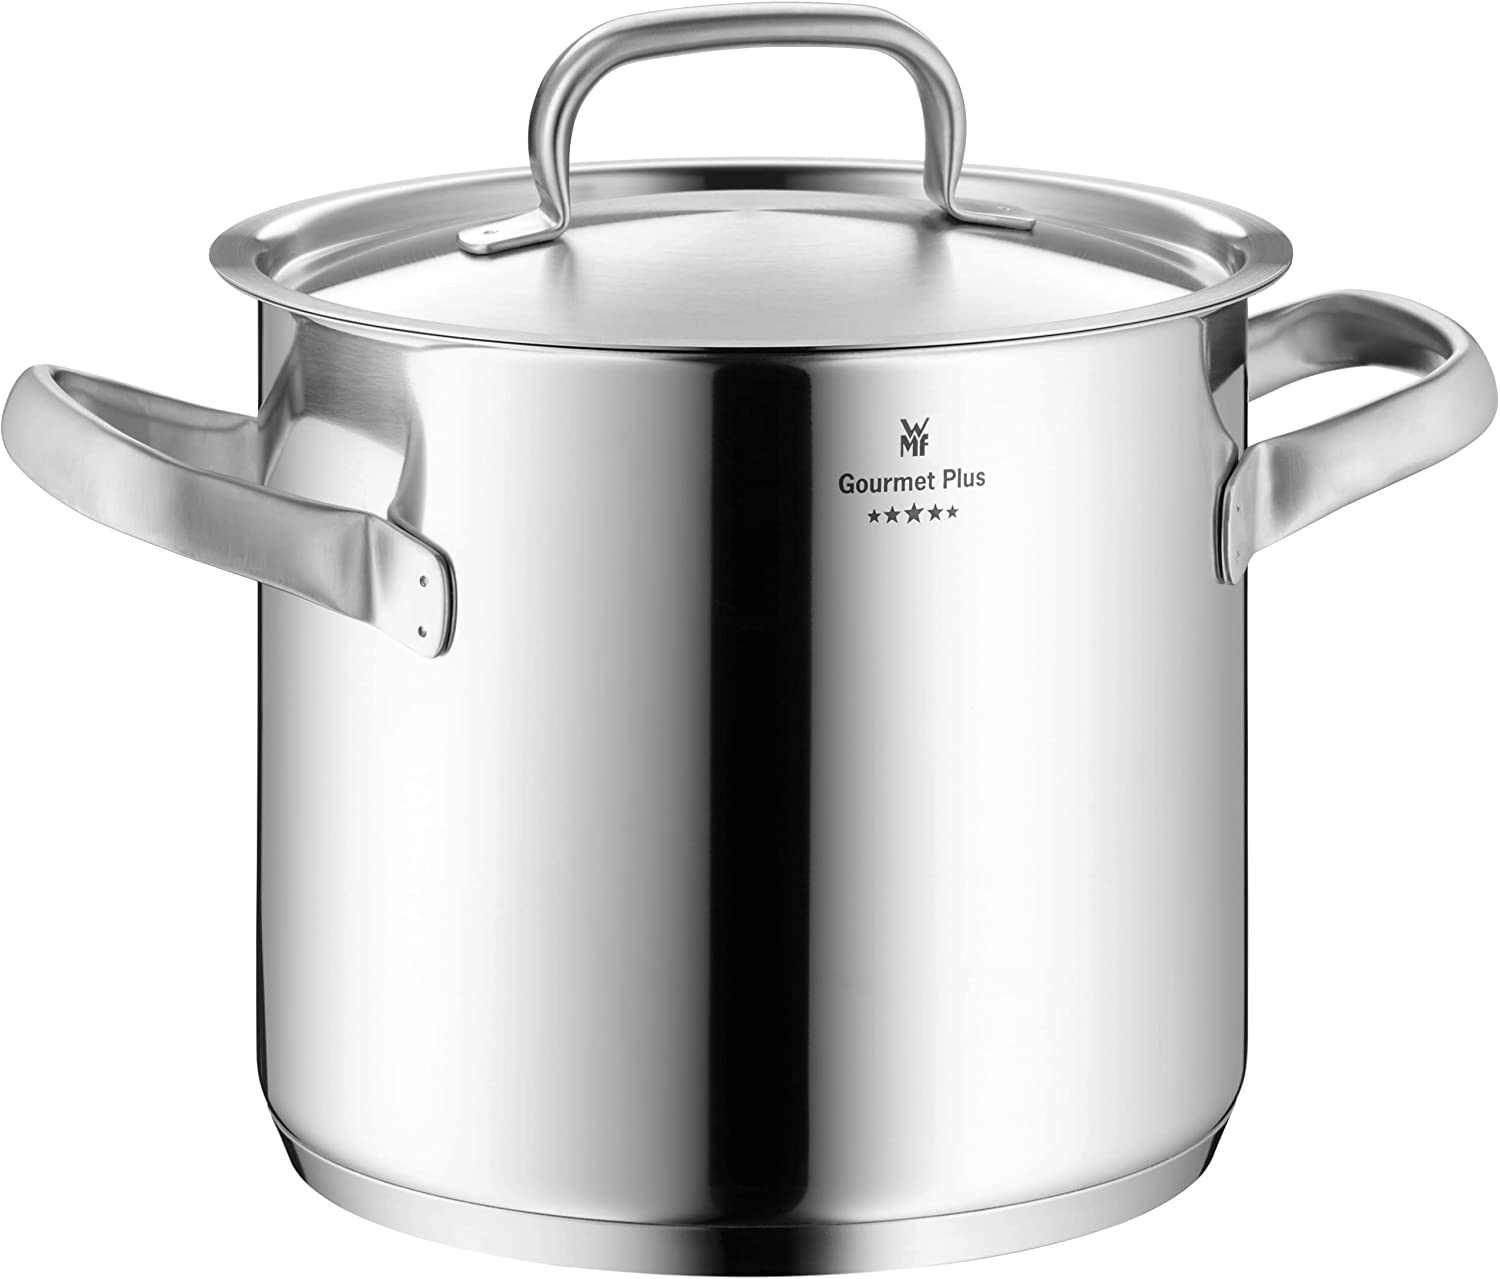 WMF Stock pot Ø 24 cm approx. 8,8l Gourmet Plus Inside scaling vapor hole hollow side handles metal lid Cromargan stainless steel suitable for all stove tops including induction dishwasher-safe